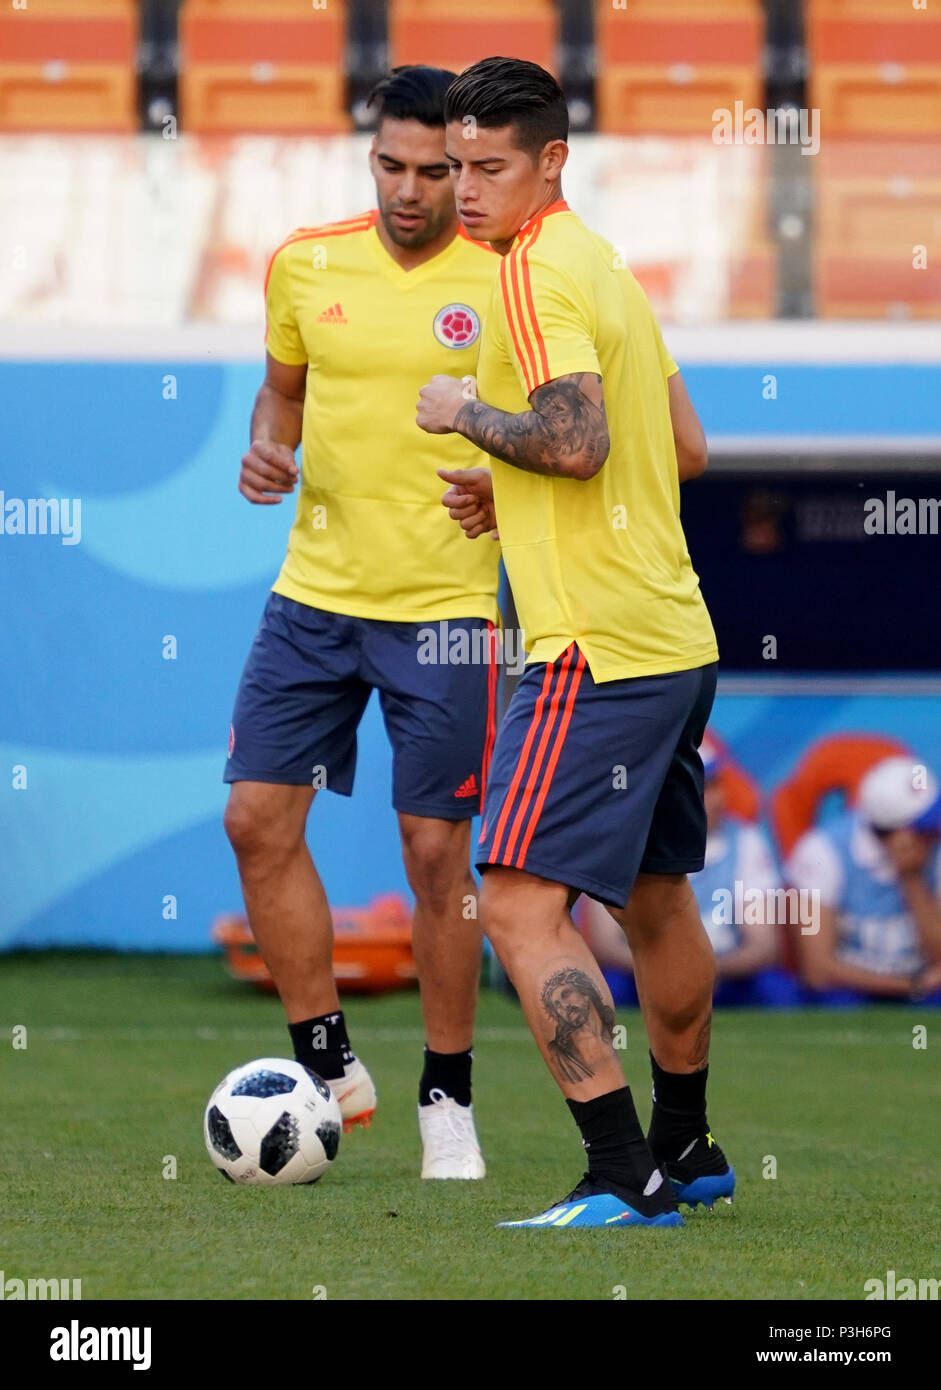 (180618) -- SARANSK, June 18, 2018(Xinhua) -- Colombia's James Rodriguez (R) and Radamel Falcao are seen during a training session prior to a group H match against Japan at the 2018 FIFA World Cup in Saransk, Russia, on June 18, 2018. (Xinhua/Lui Siu Wai) Stock Photo